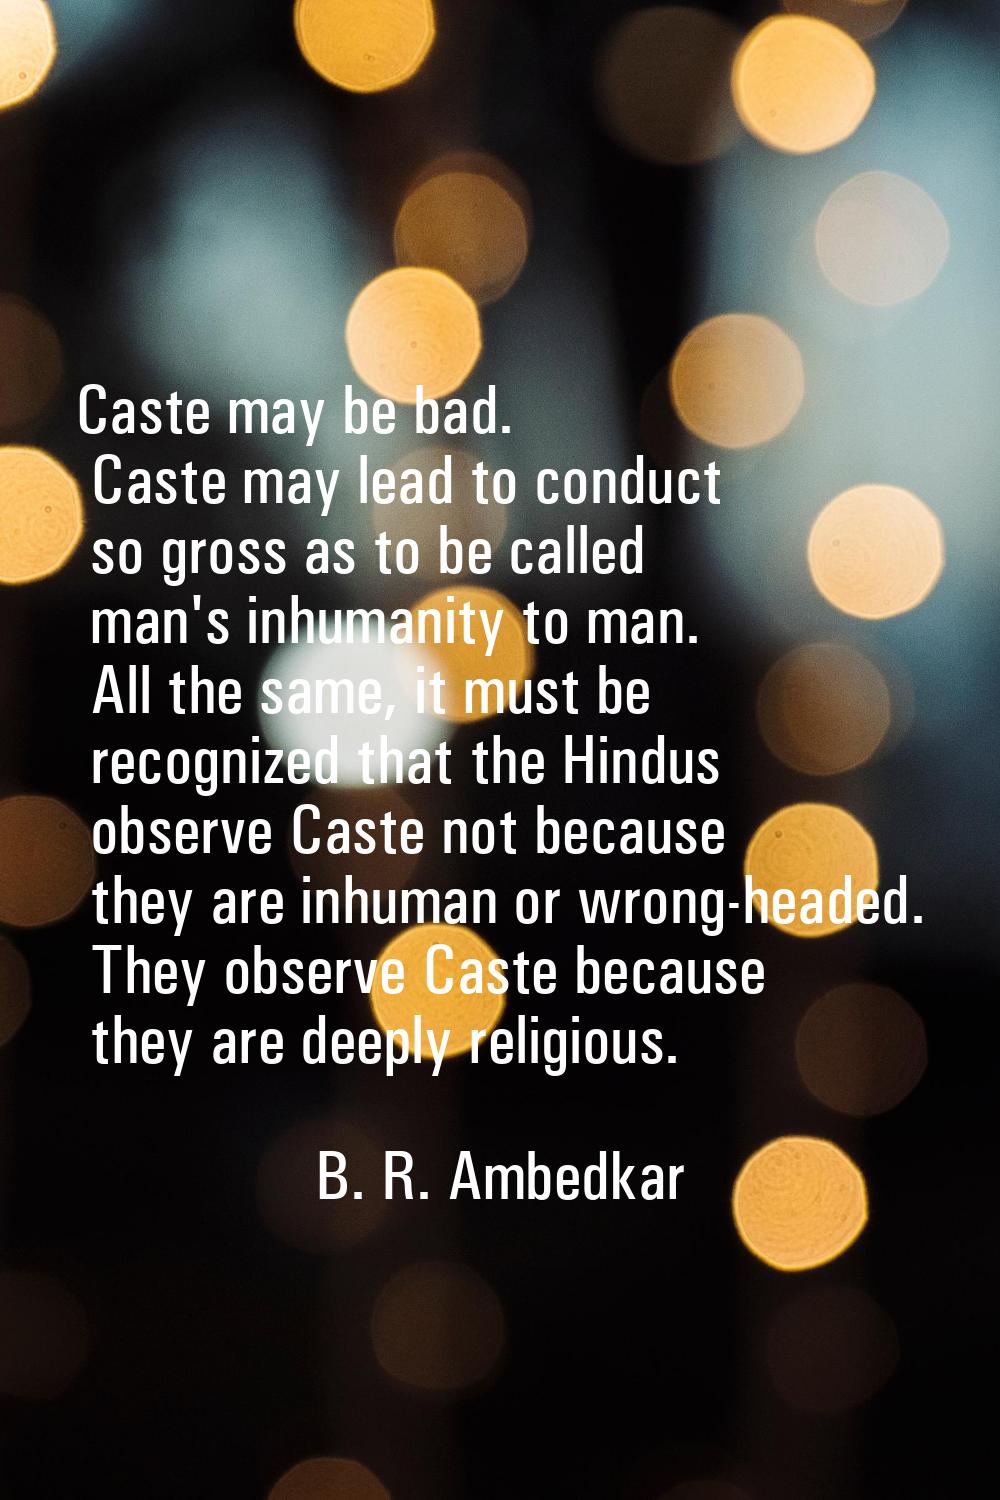 Caste may be bad. Caste may lead to conduct so gross as to be called man's inhumanity to man. All t